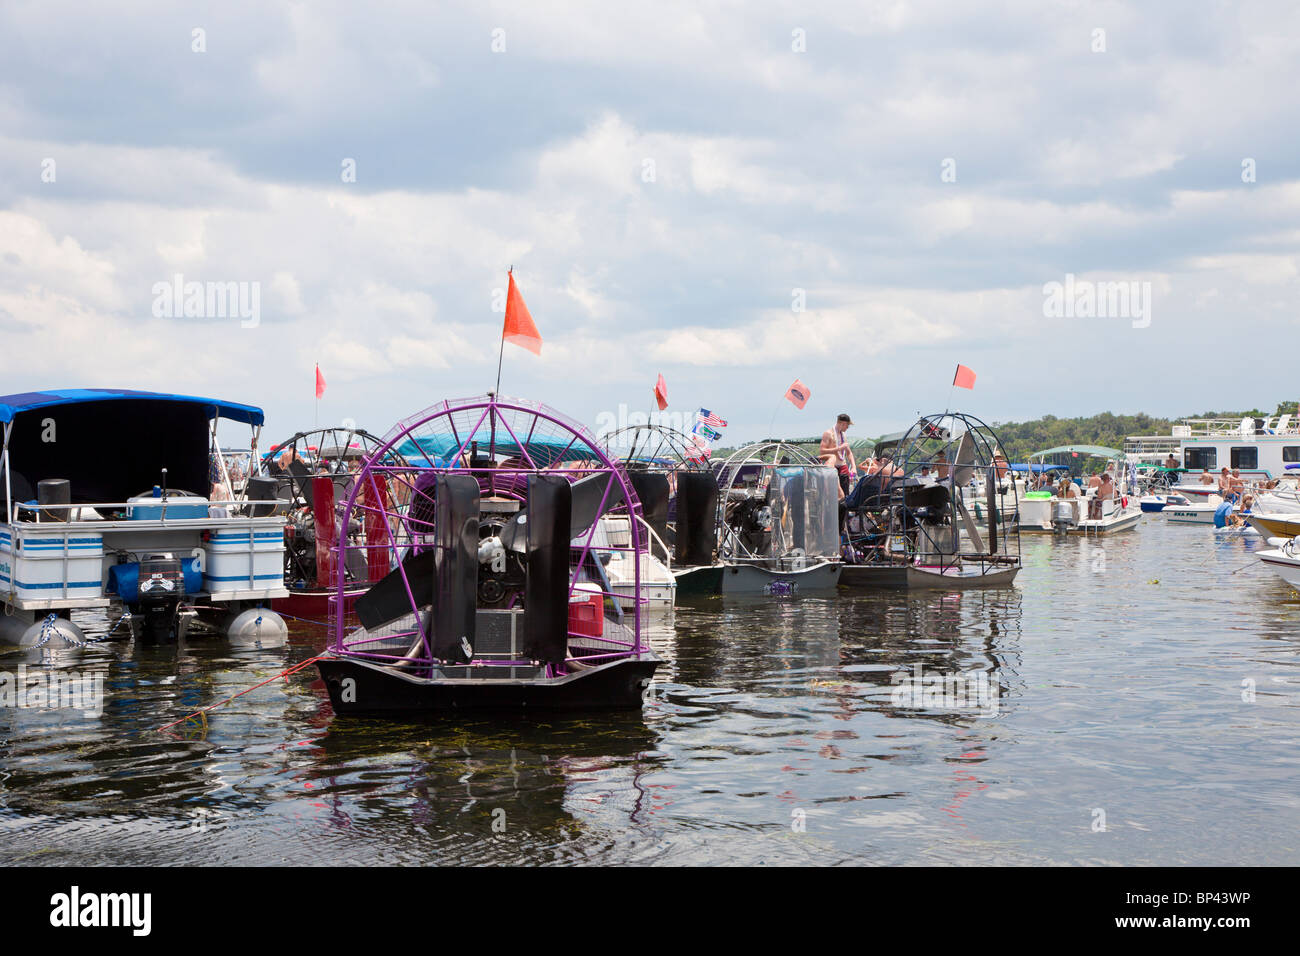 Lake George, FL - May 2010 - Airboats rafted together for a day long party on Lake George in central Florida Stock Photo